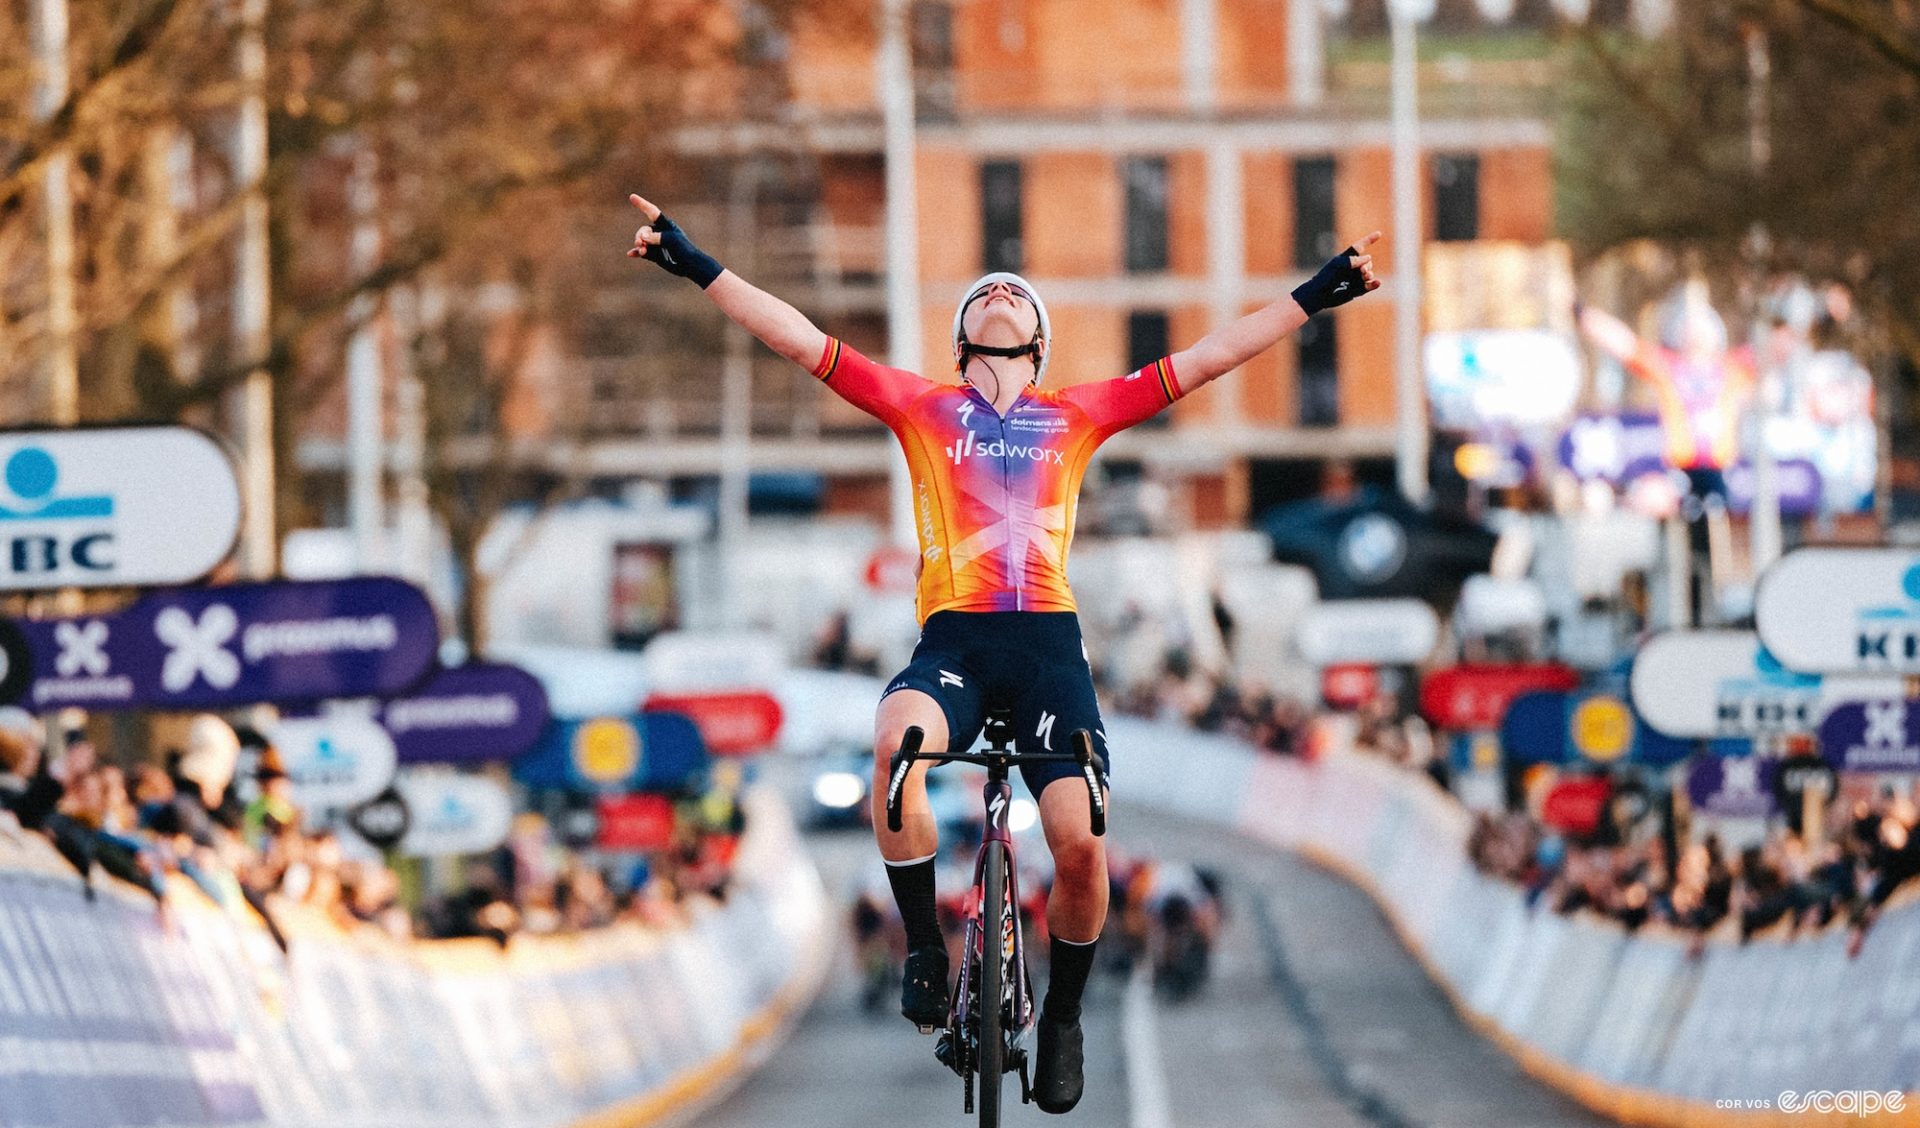 Kopecky raises both her arms in victory, with a group of riders sprinting in the background.